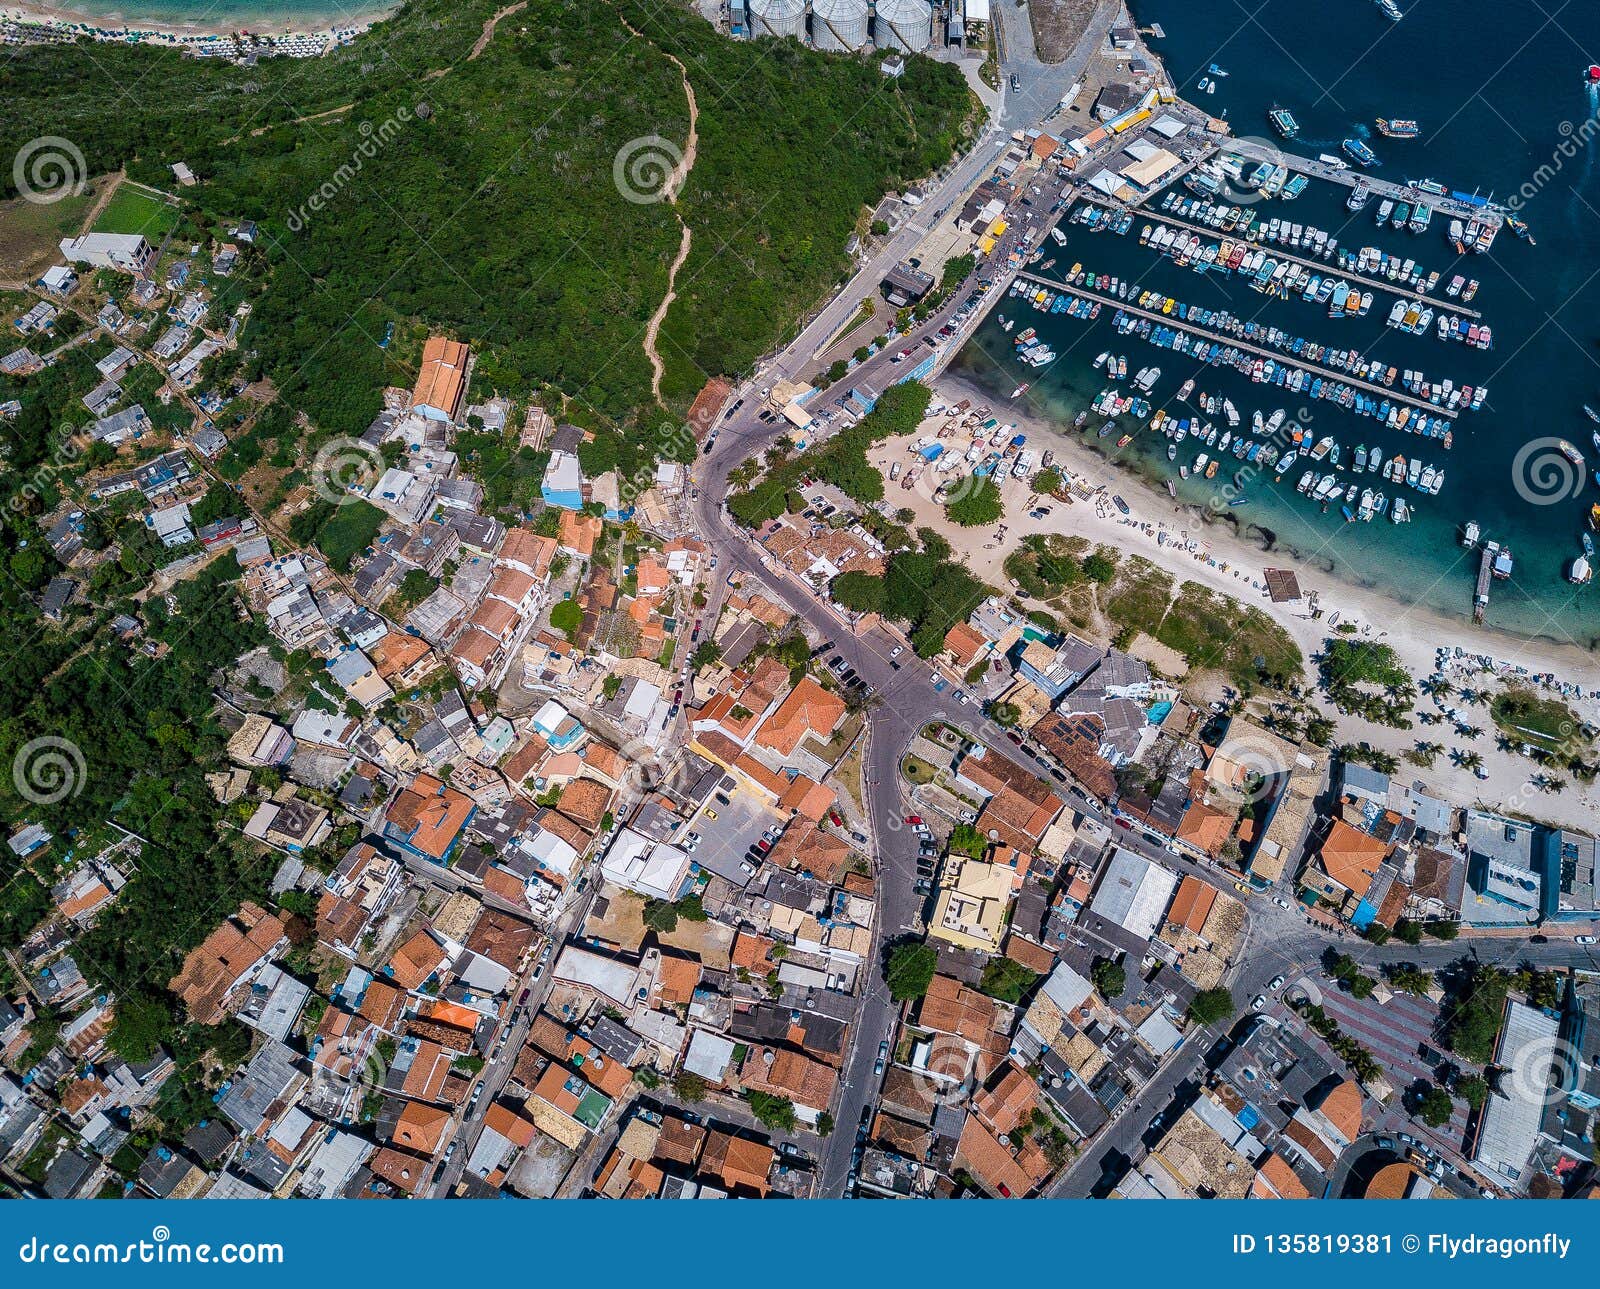 aerial photo city, ocean and mountains. view from the top to streets of arraial do cabo brazilian state of rio de